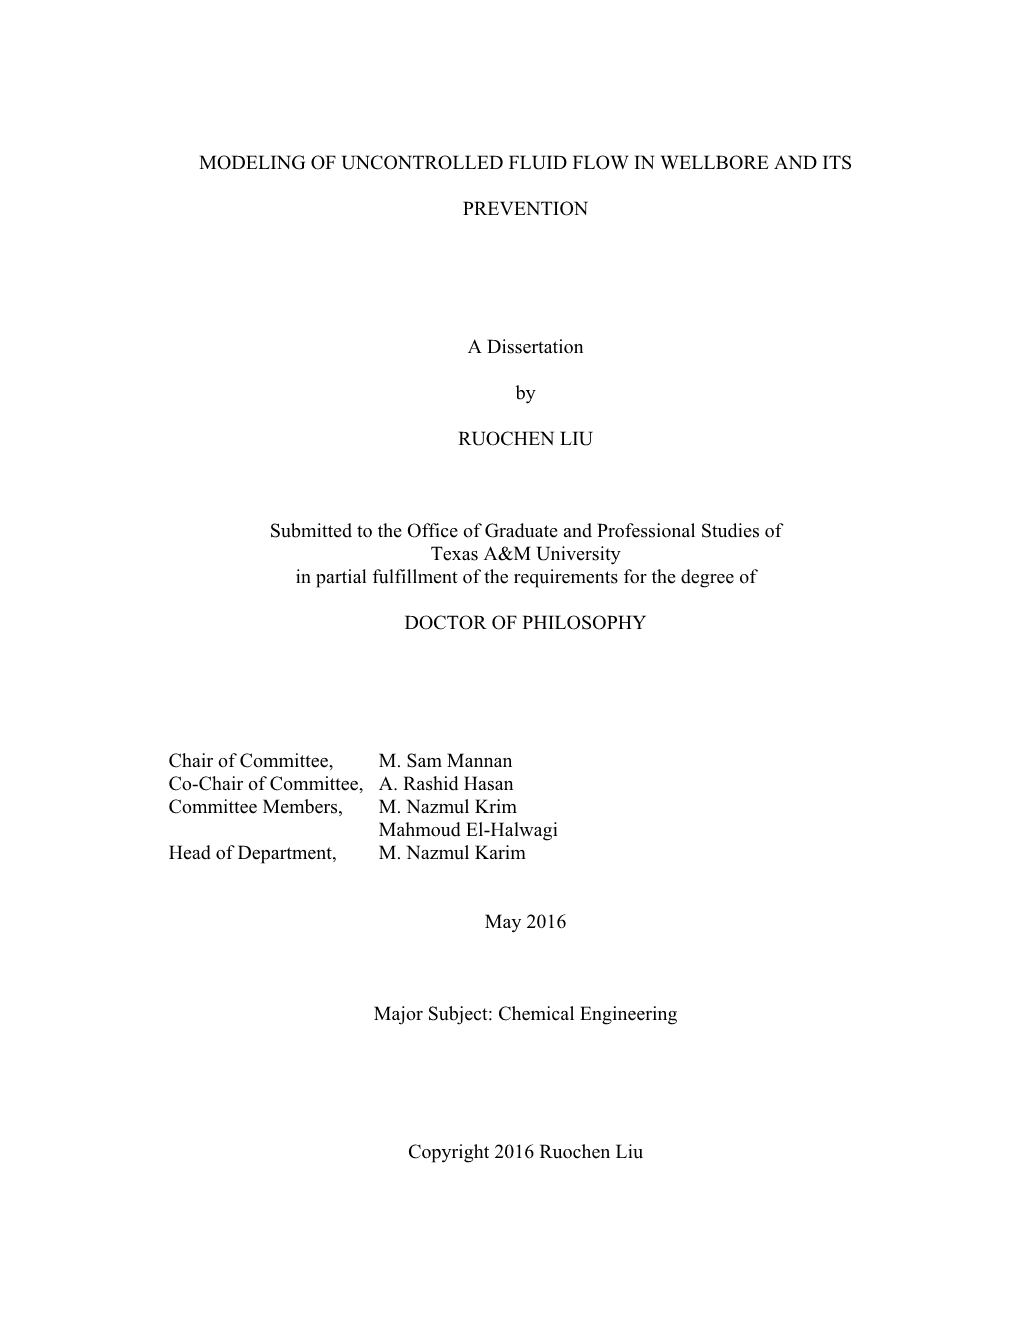 MODELING of UNCONTROLLED FLUID FLOW in WELLBORE and ITS PREVENTION a Dissertation by RUOCHEN LIU Submitted to the Office Of